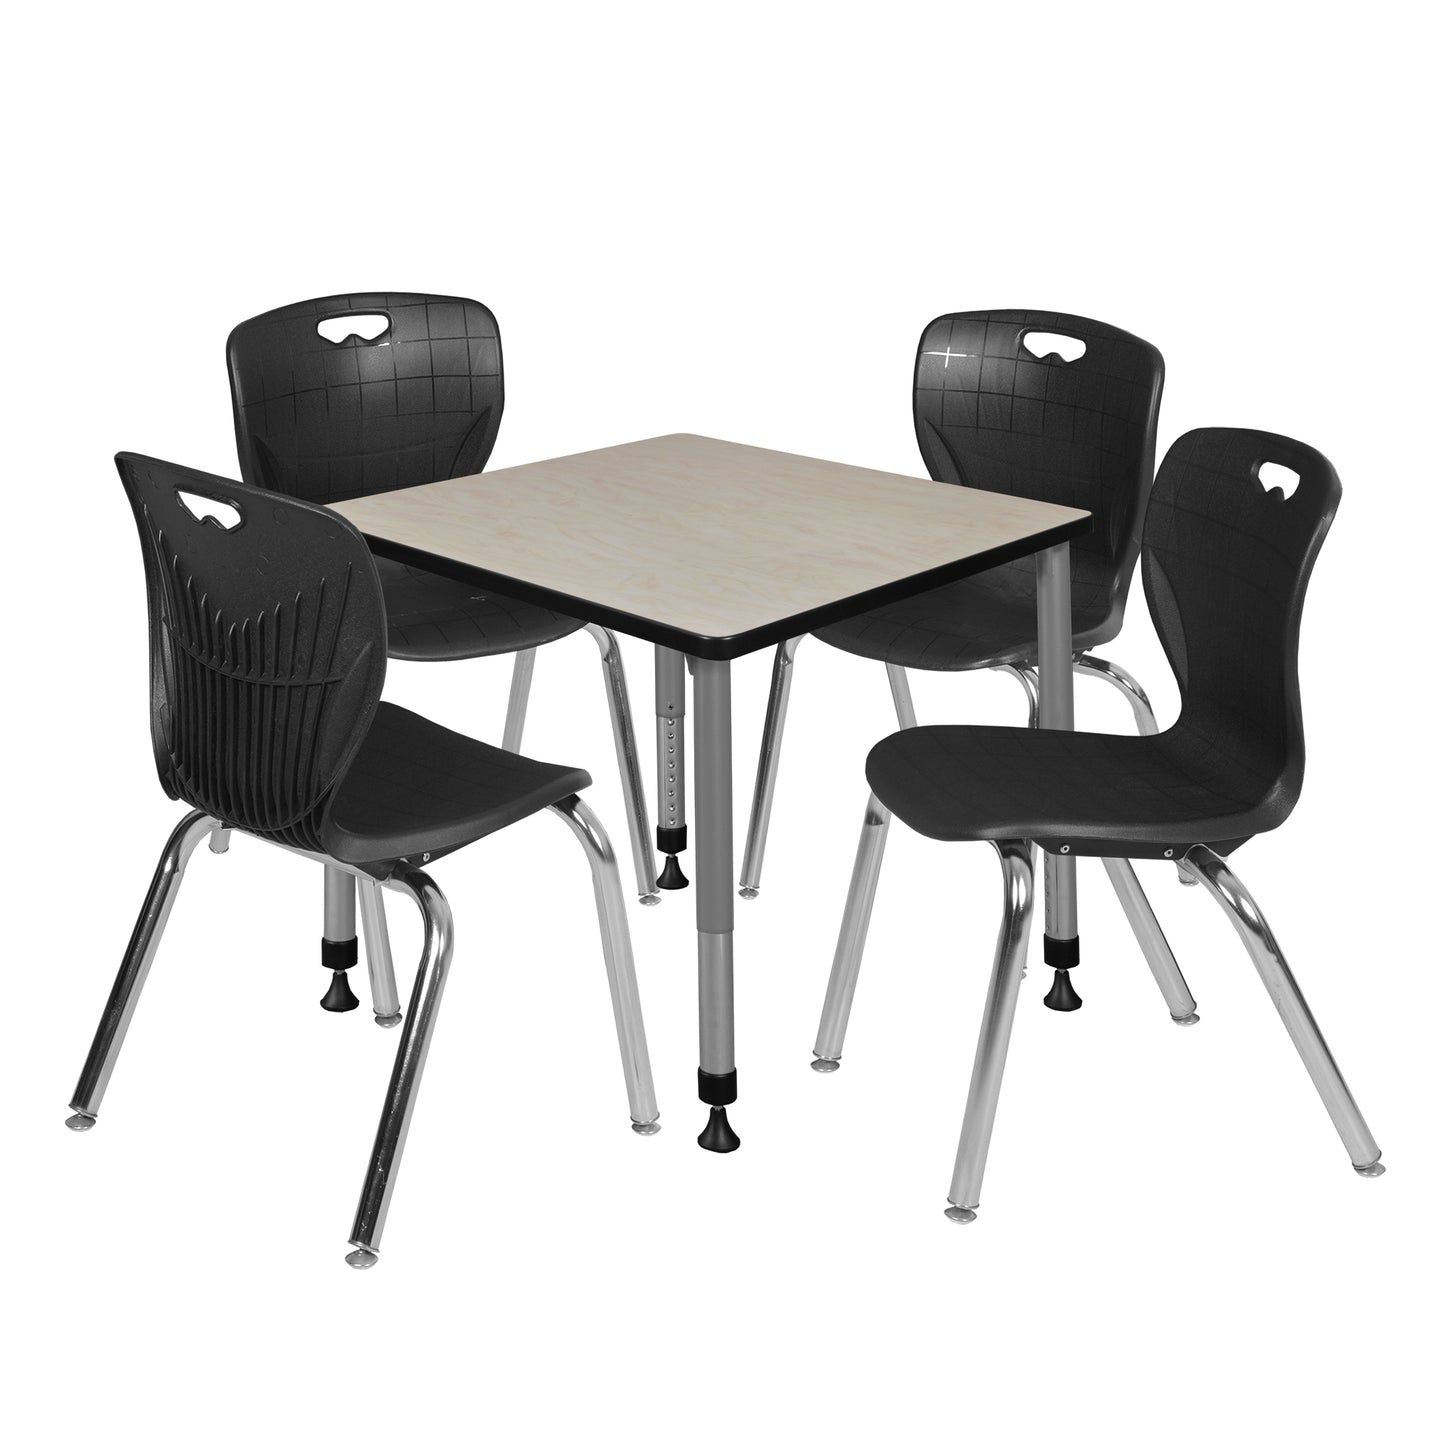 Regency Kee 30 in. Square Adjustable Classroom Table & 4 Andy 18 in. Stack Chairs